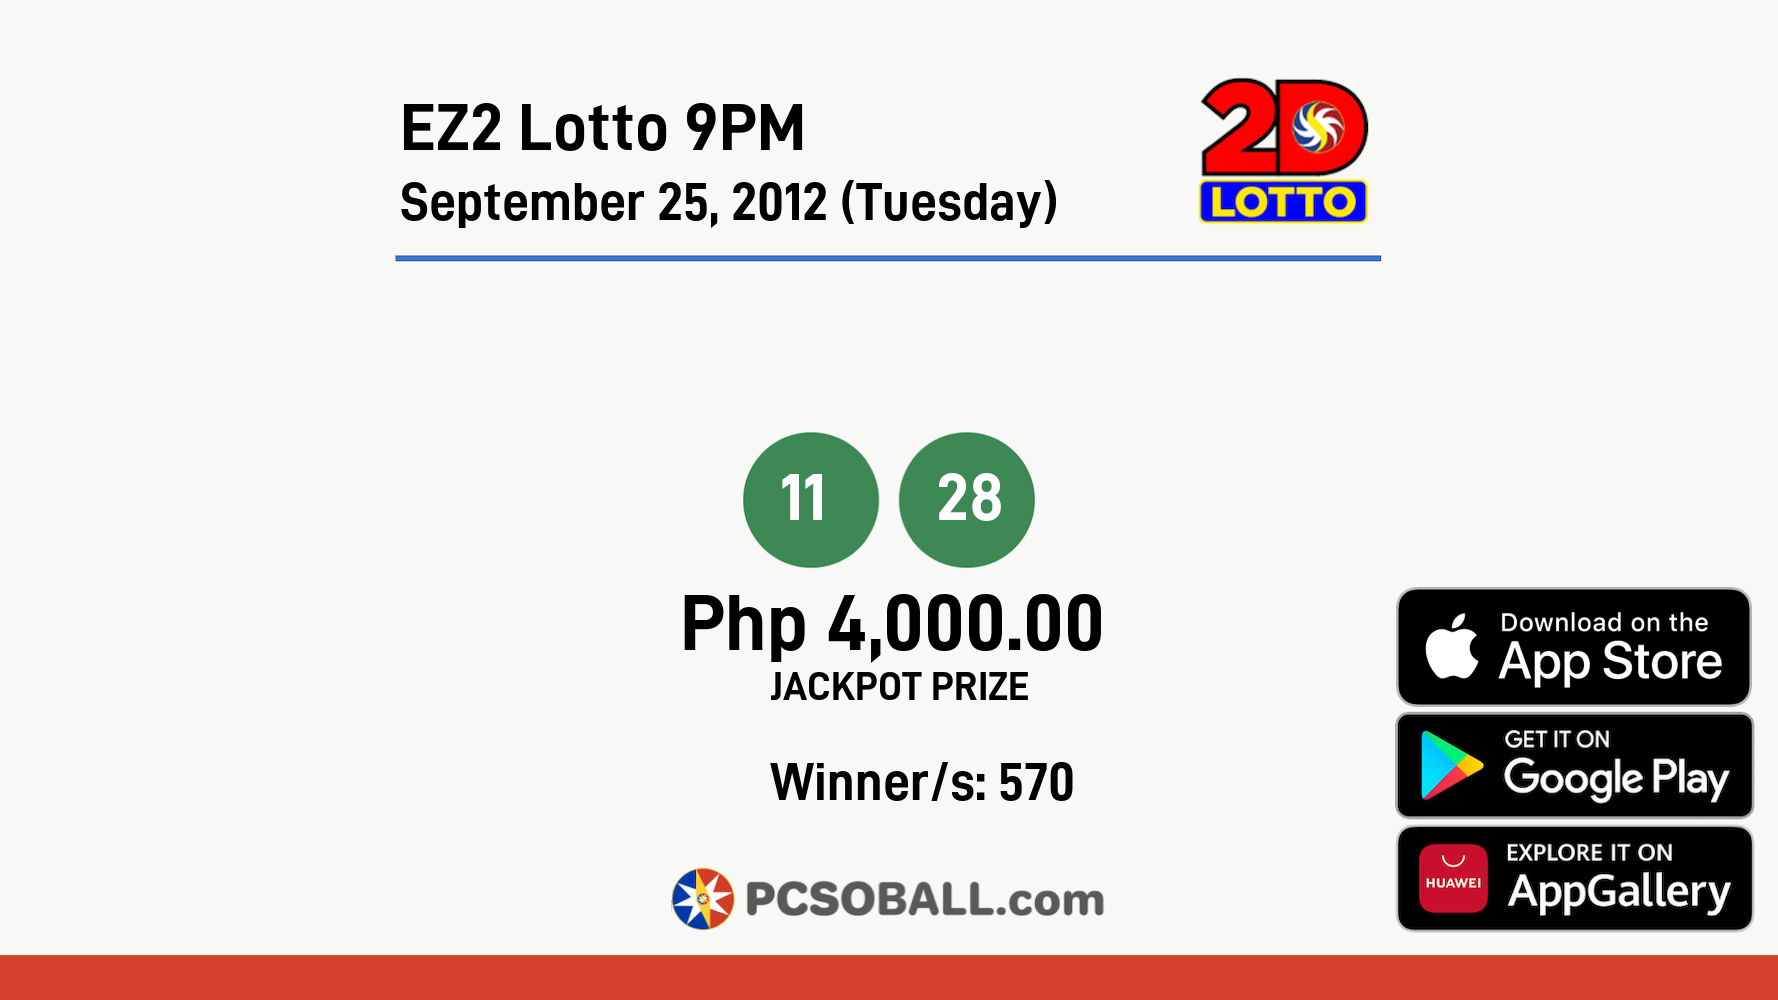 EZ2 Lotto 9PM September 25, 2012 (Tuesday) Result